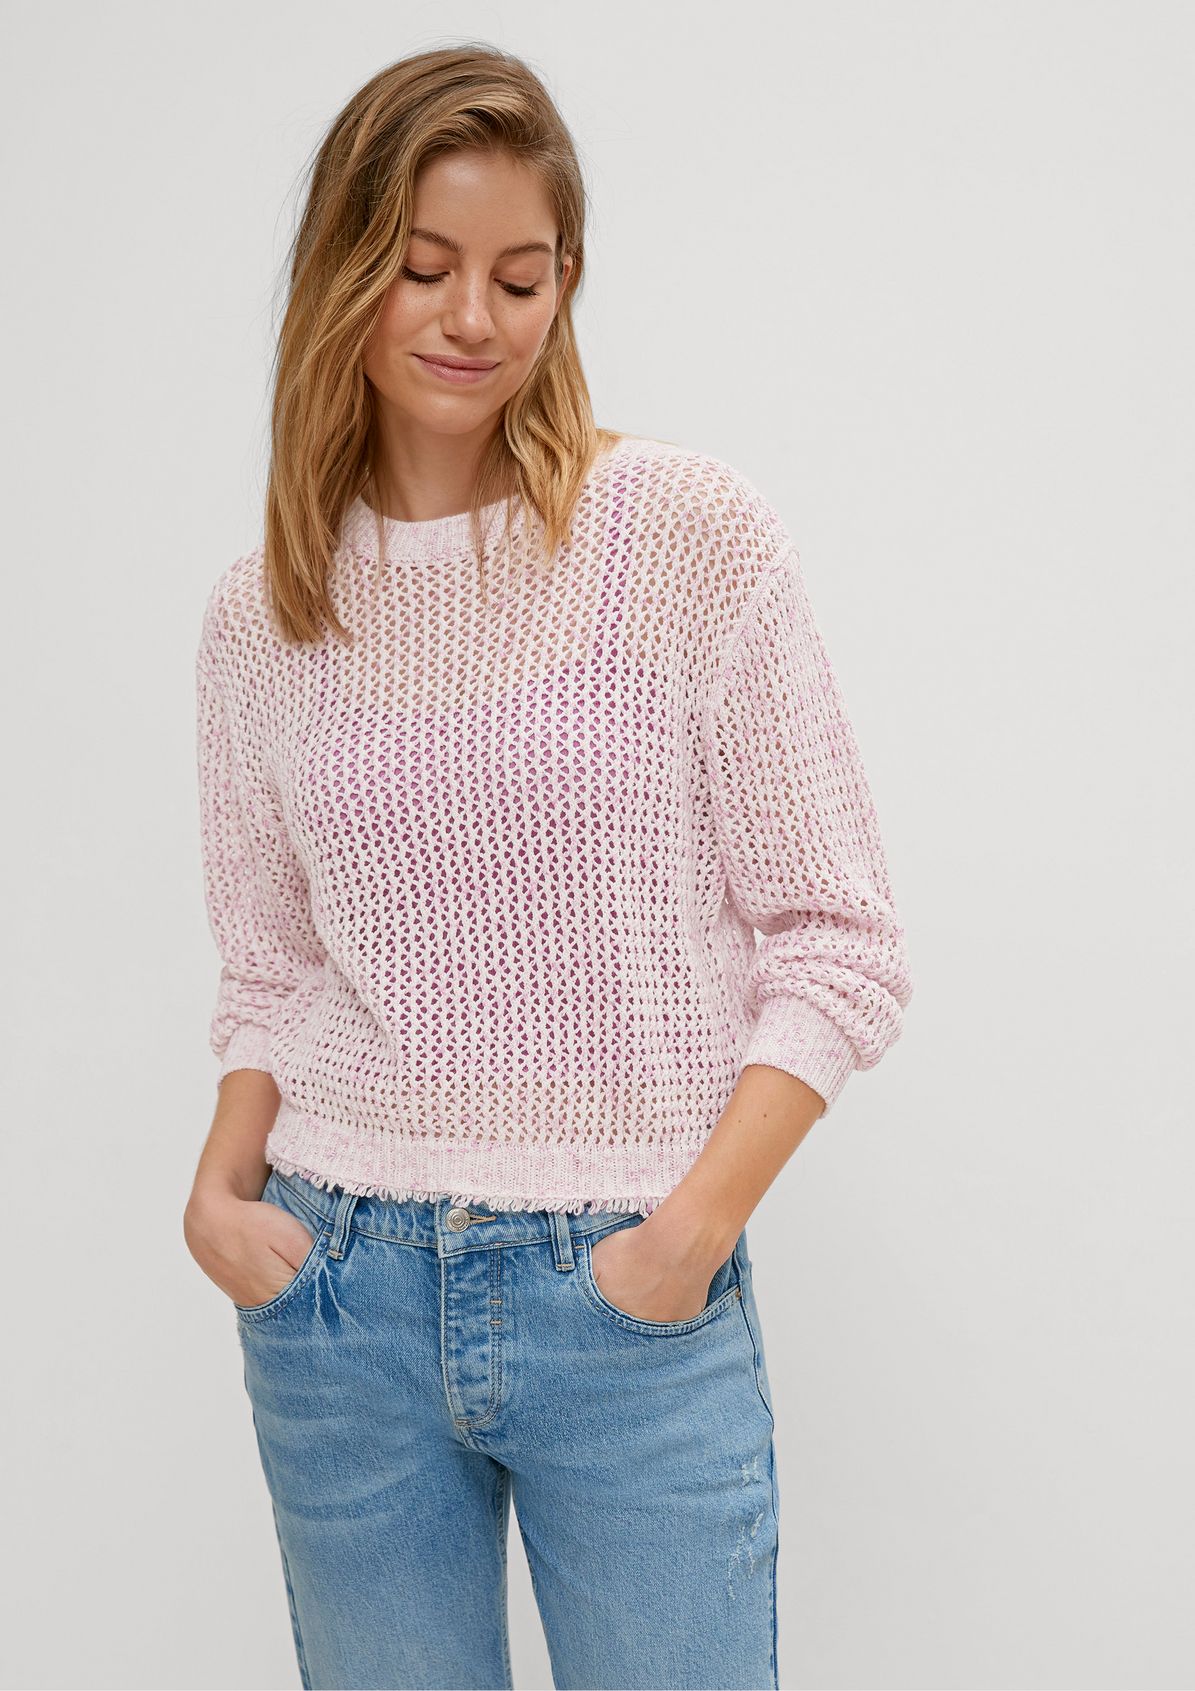 Openwork knit jumper from comma